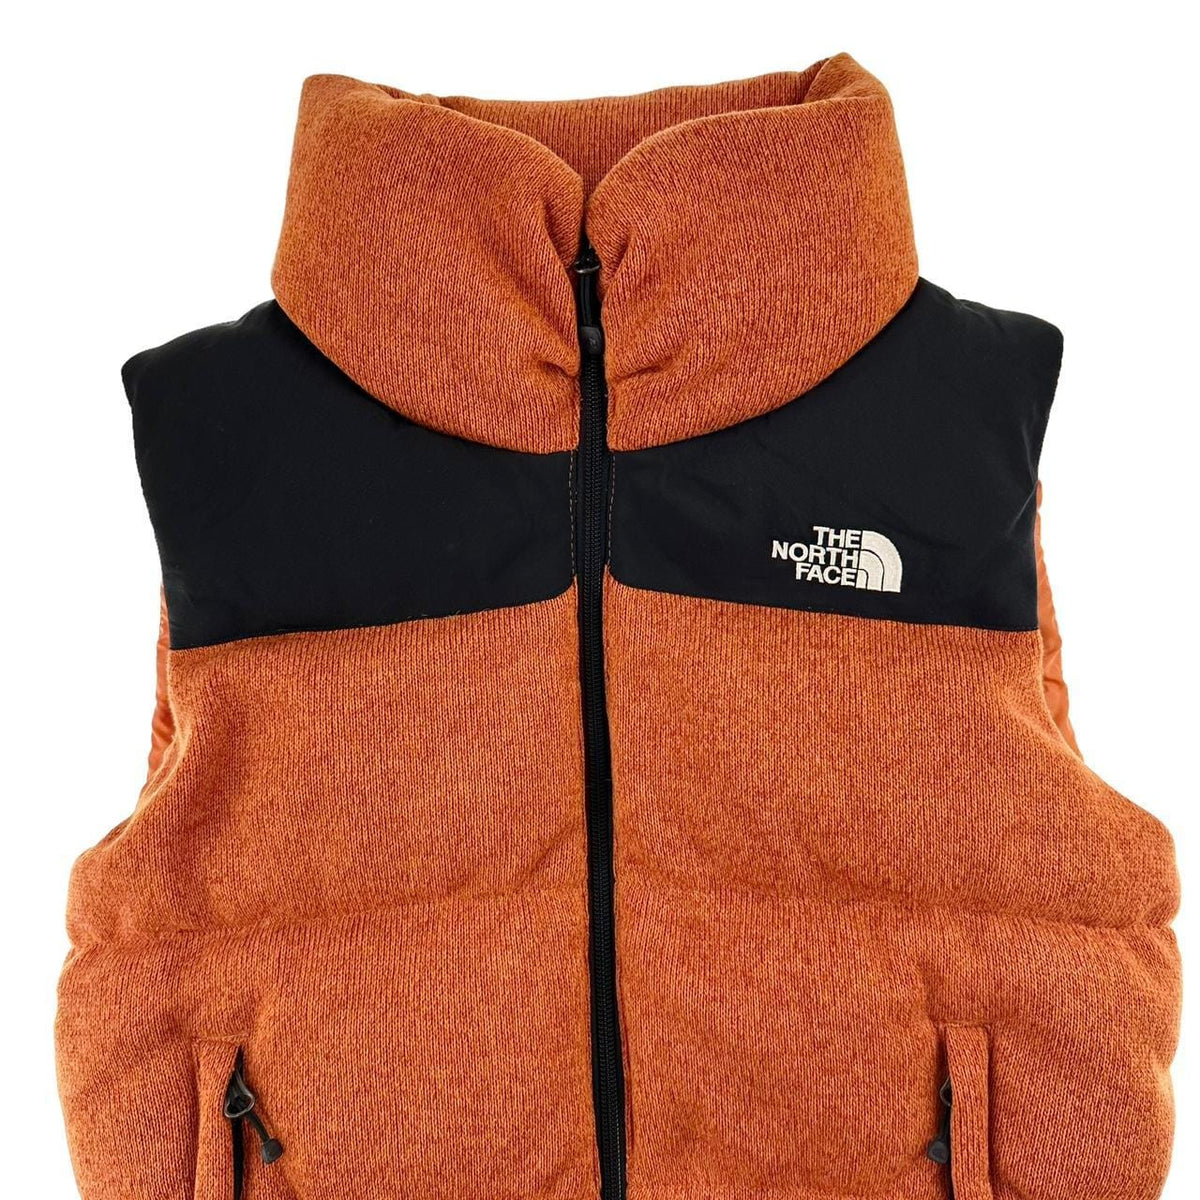 North Face gilet woman’s size M